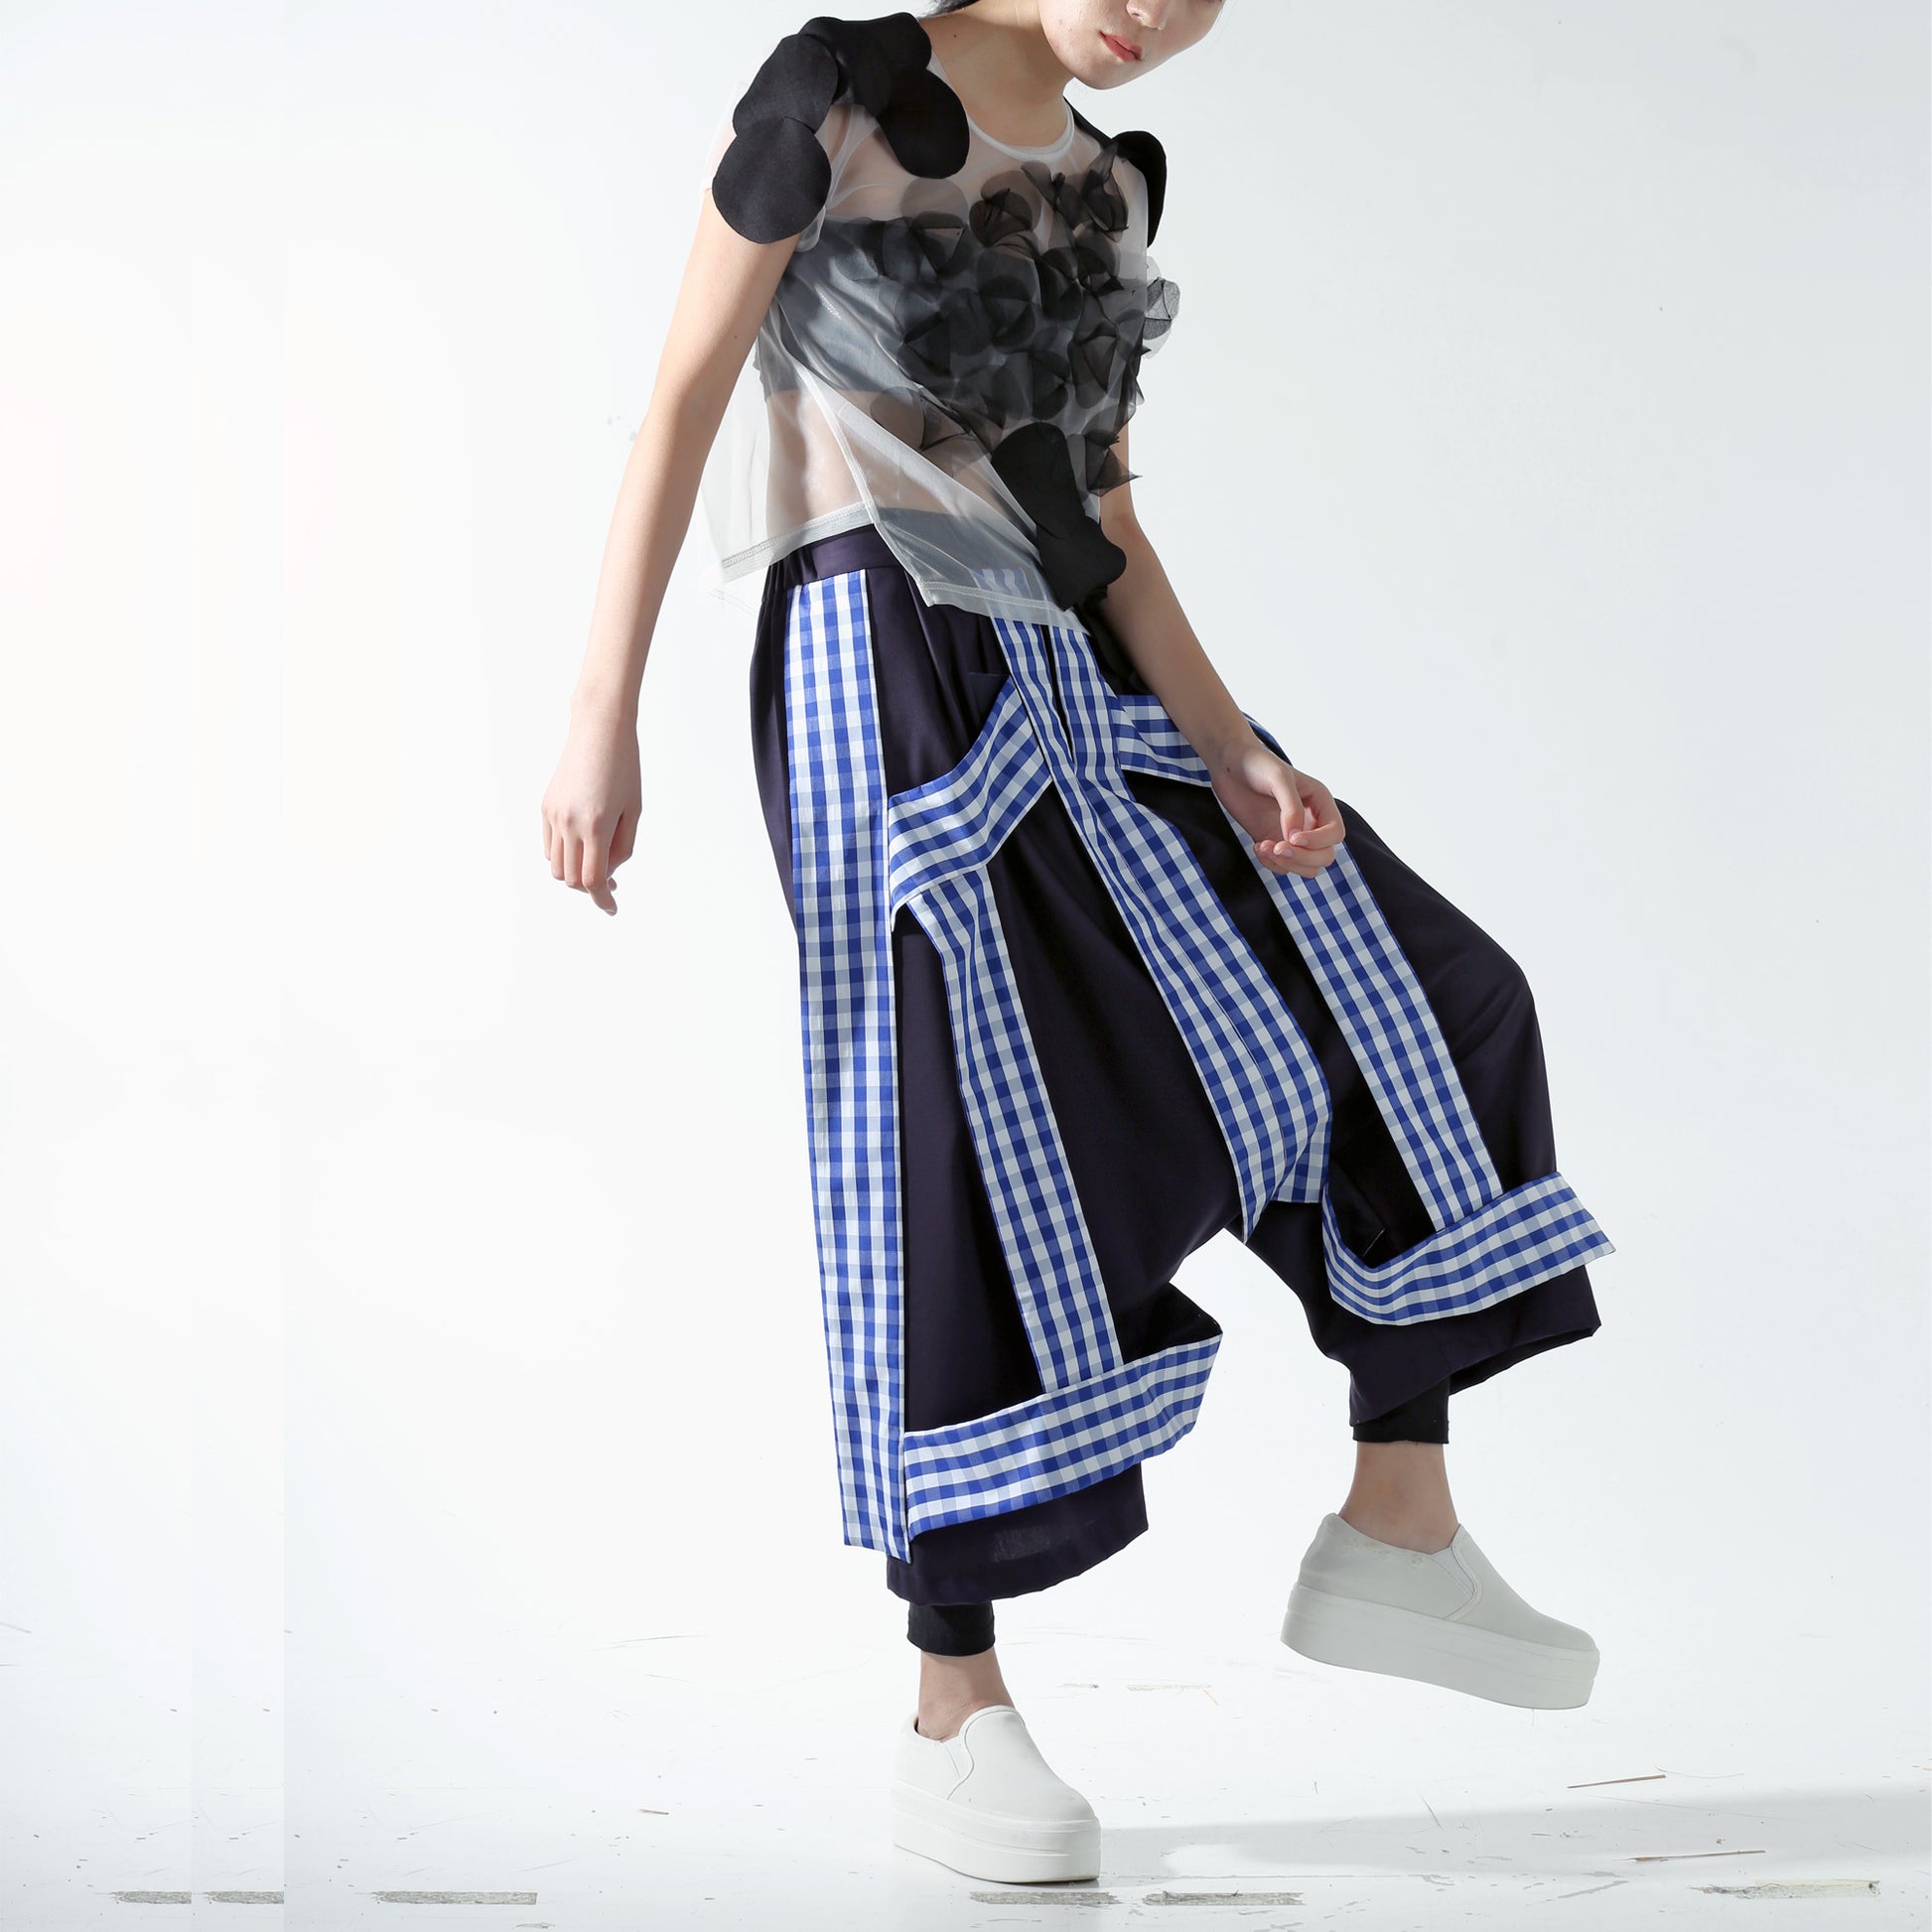 Trousers - Structured Tapes on Drop Crotch Wide Legs - phenotypsetter, fashion designer label, unisex, women, accessories